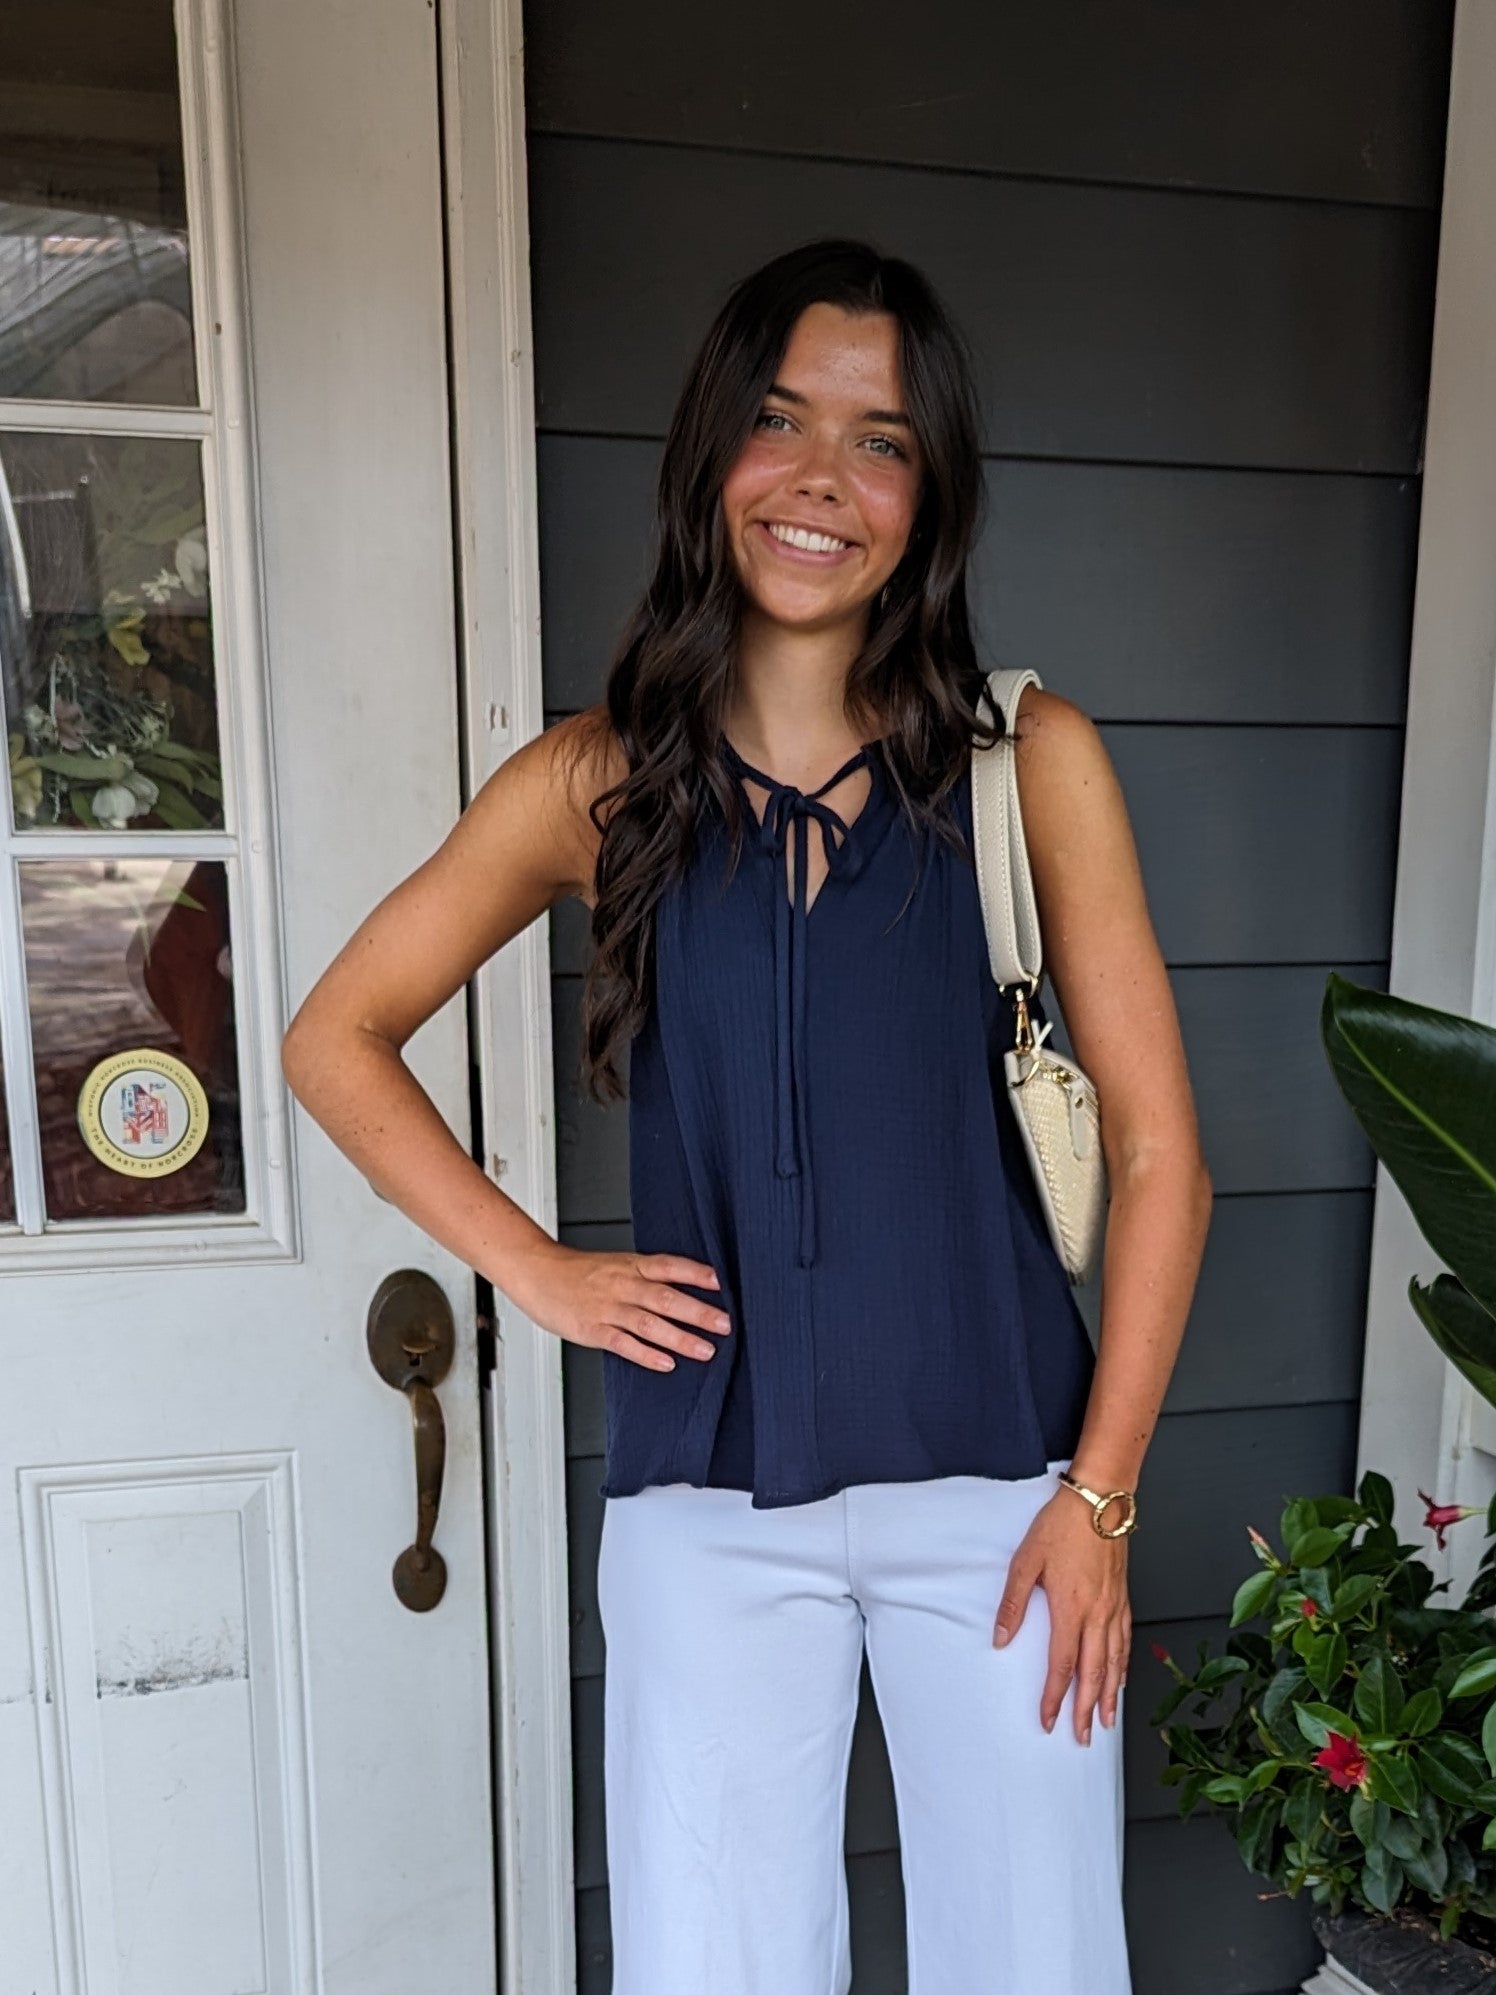 The Tulip Back Halter Top is perfect for the spring and summer with its beautiful navy color, spaghetti straps and tie front. The cutest feature is its open wrap-around back, making it such an adorable top!  Material: 100% Cotton  Care Instructions: Hand wash cold, line dry